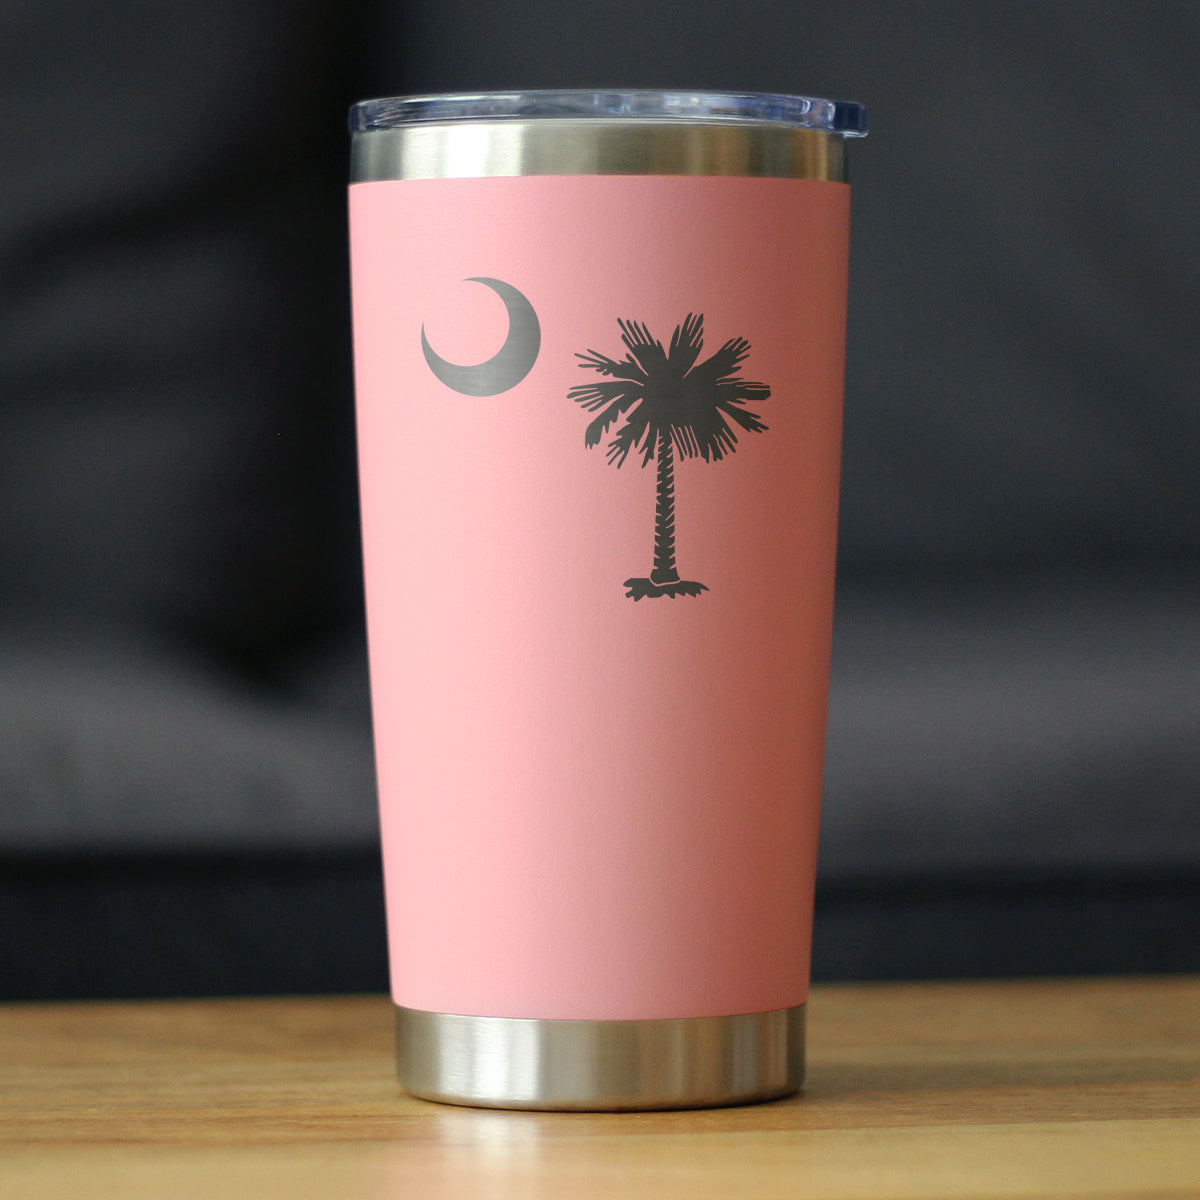 South Carolina Flag - Insulated Coffee Tumbler Cup with Sliding Lid - Stainless Steel Insulated Mug - State Themed Drinking Decor and Gifts for South Carolinian Women &amp; Men